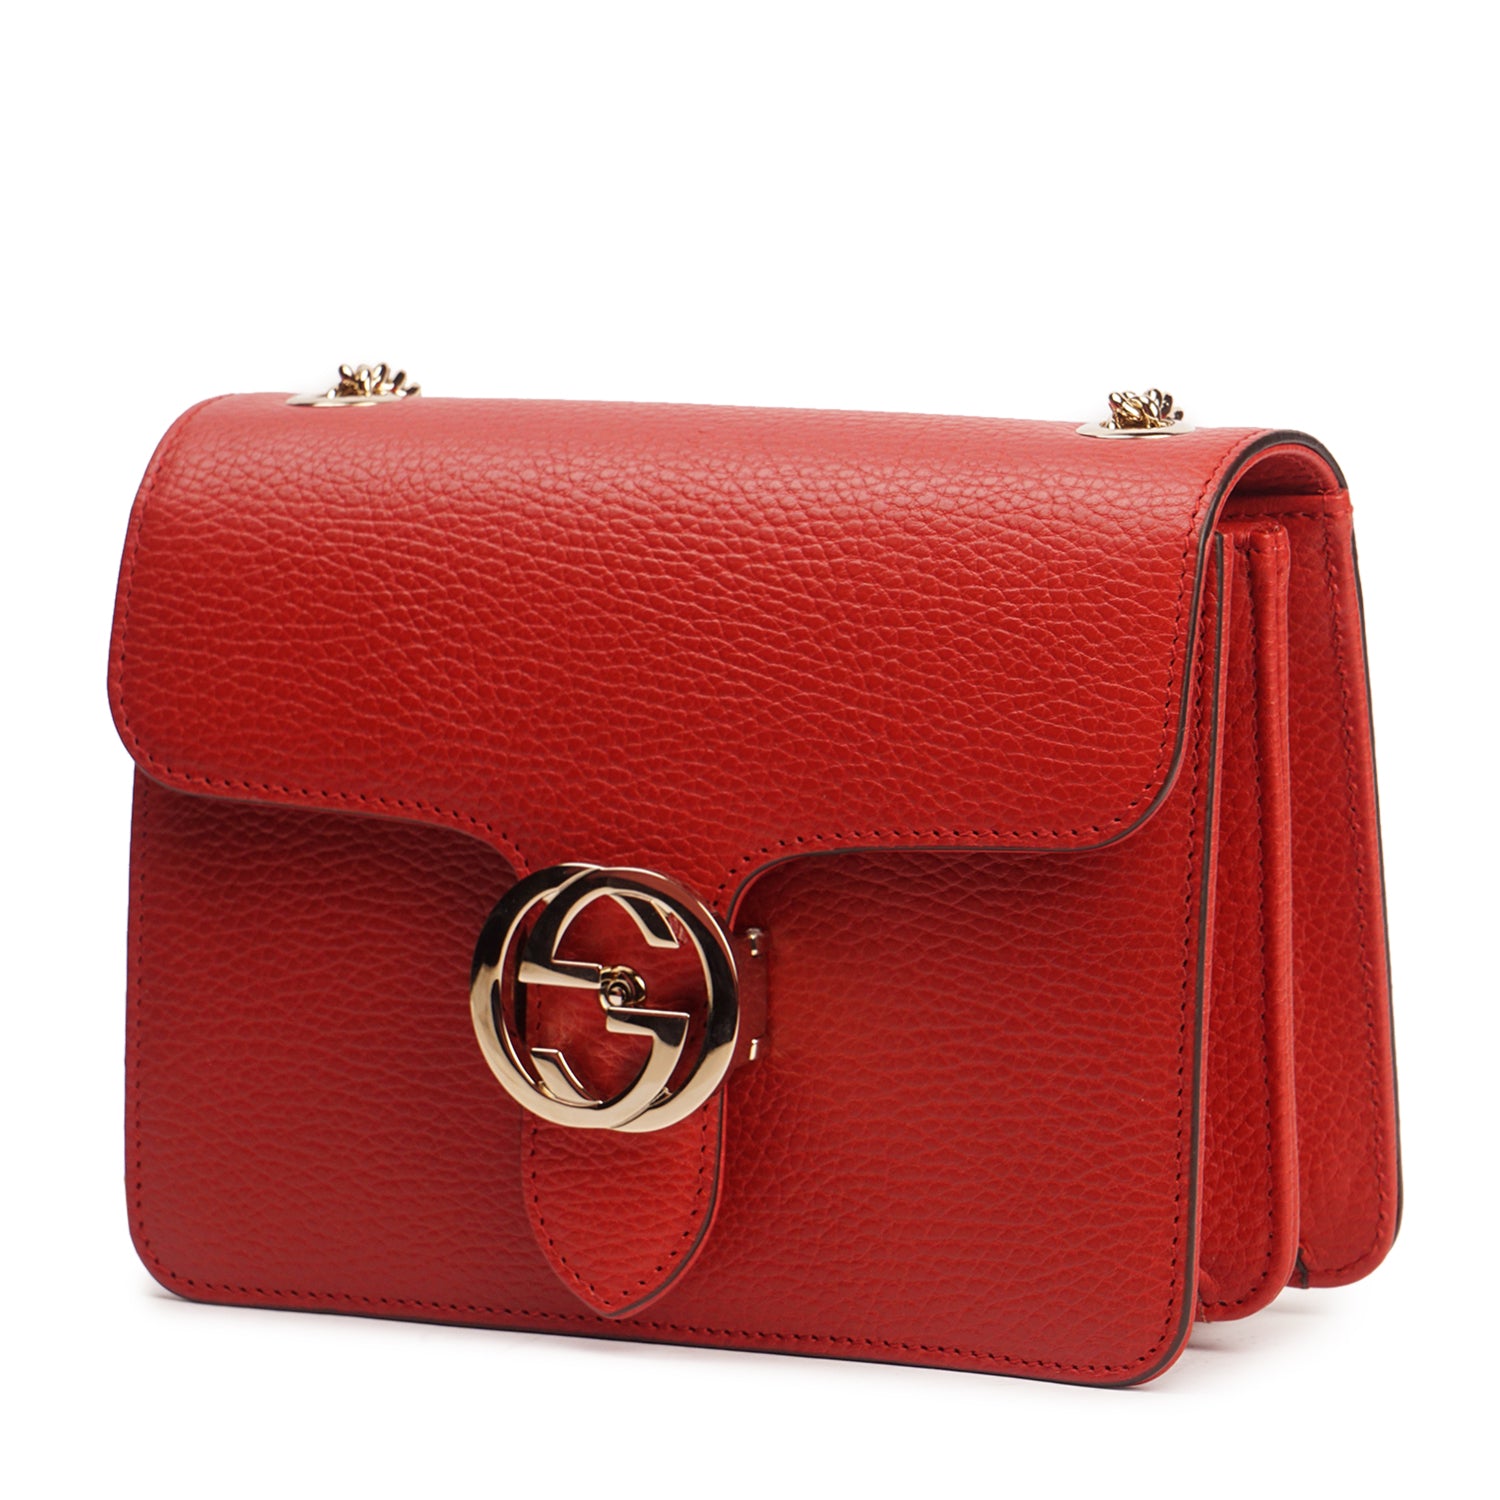 Gucci Handbag Red Nice Micro Guccissima Patent Leather Tote NEW :  Amazon.ca: Clothing, Shoes & Accessories